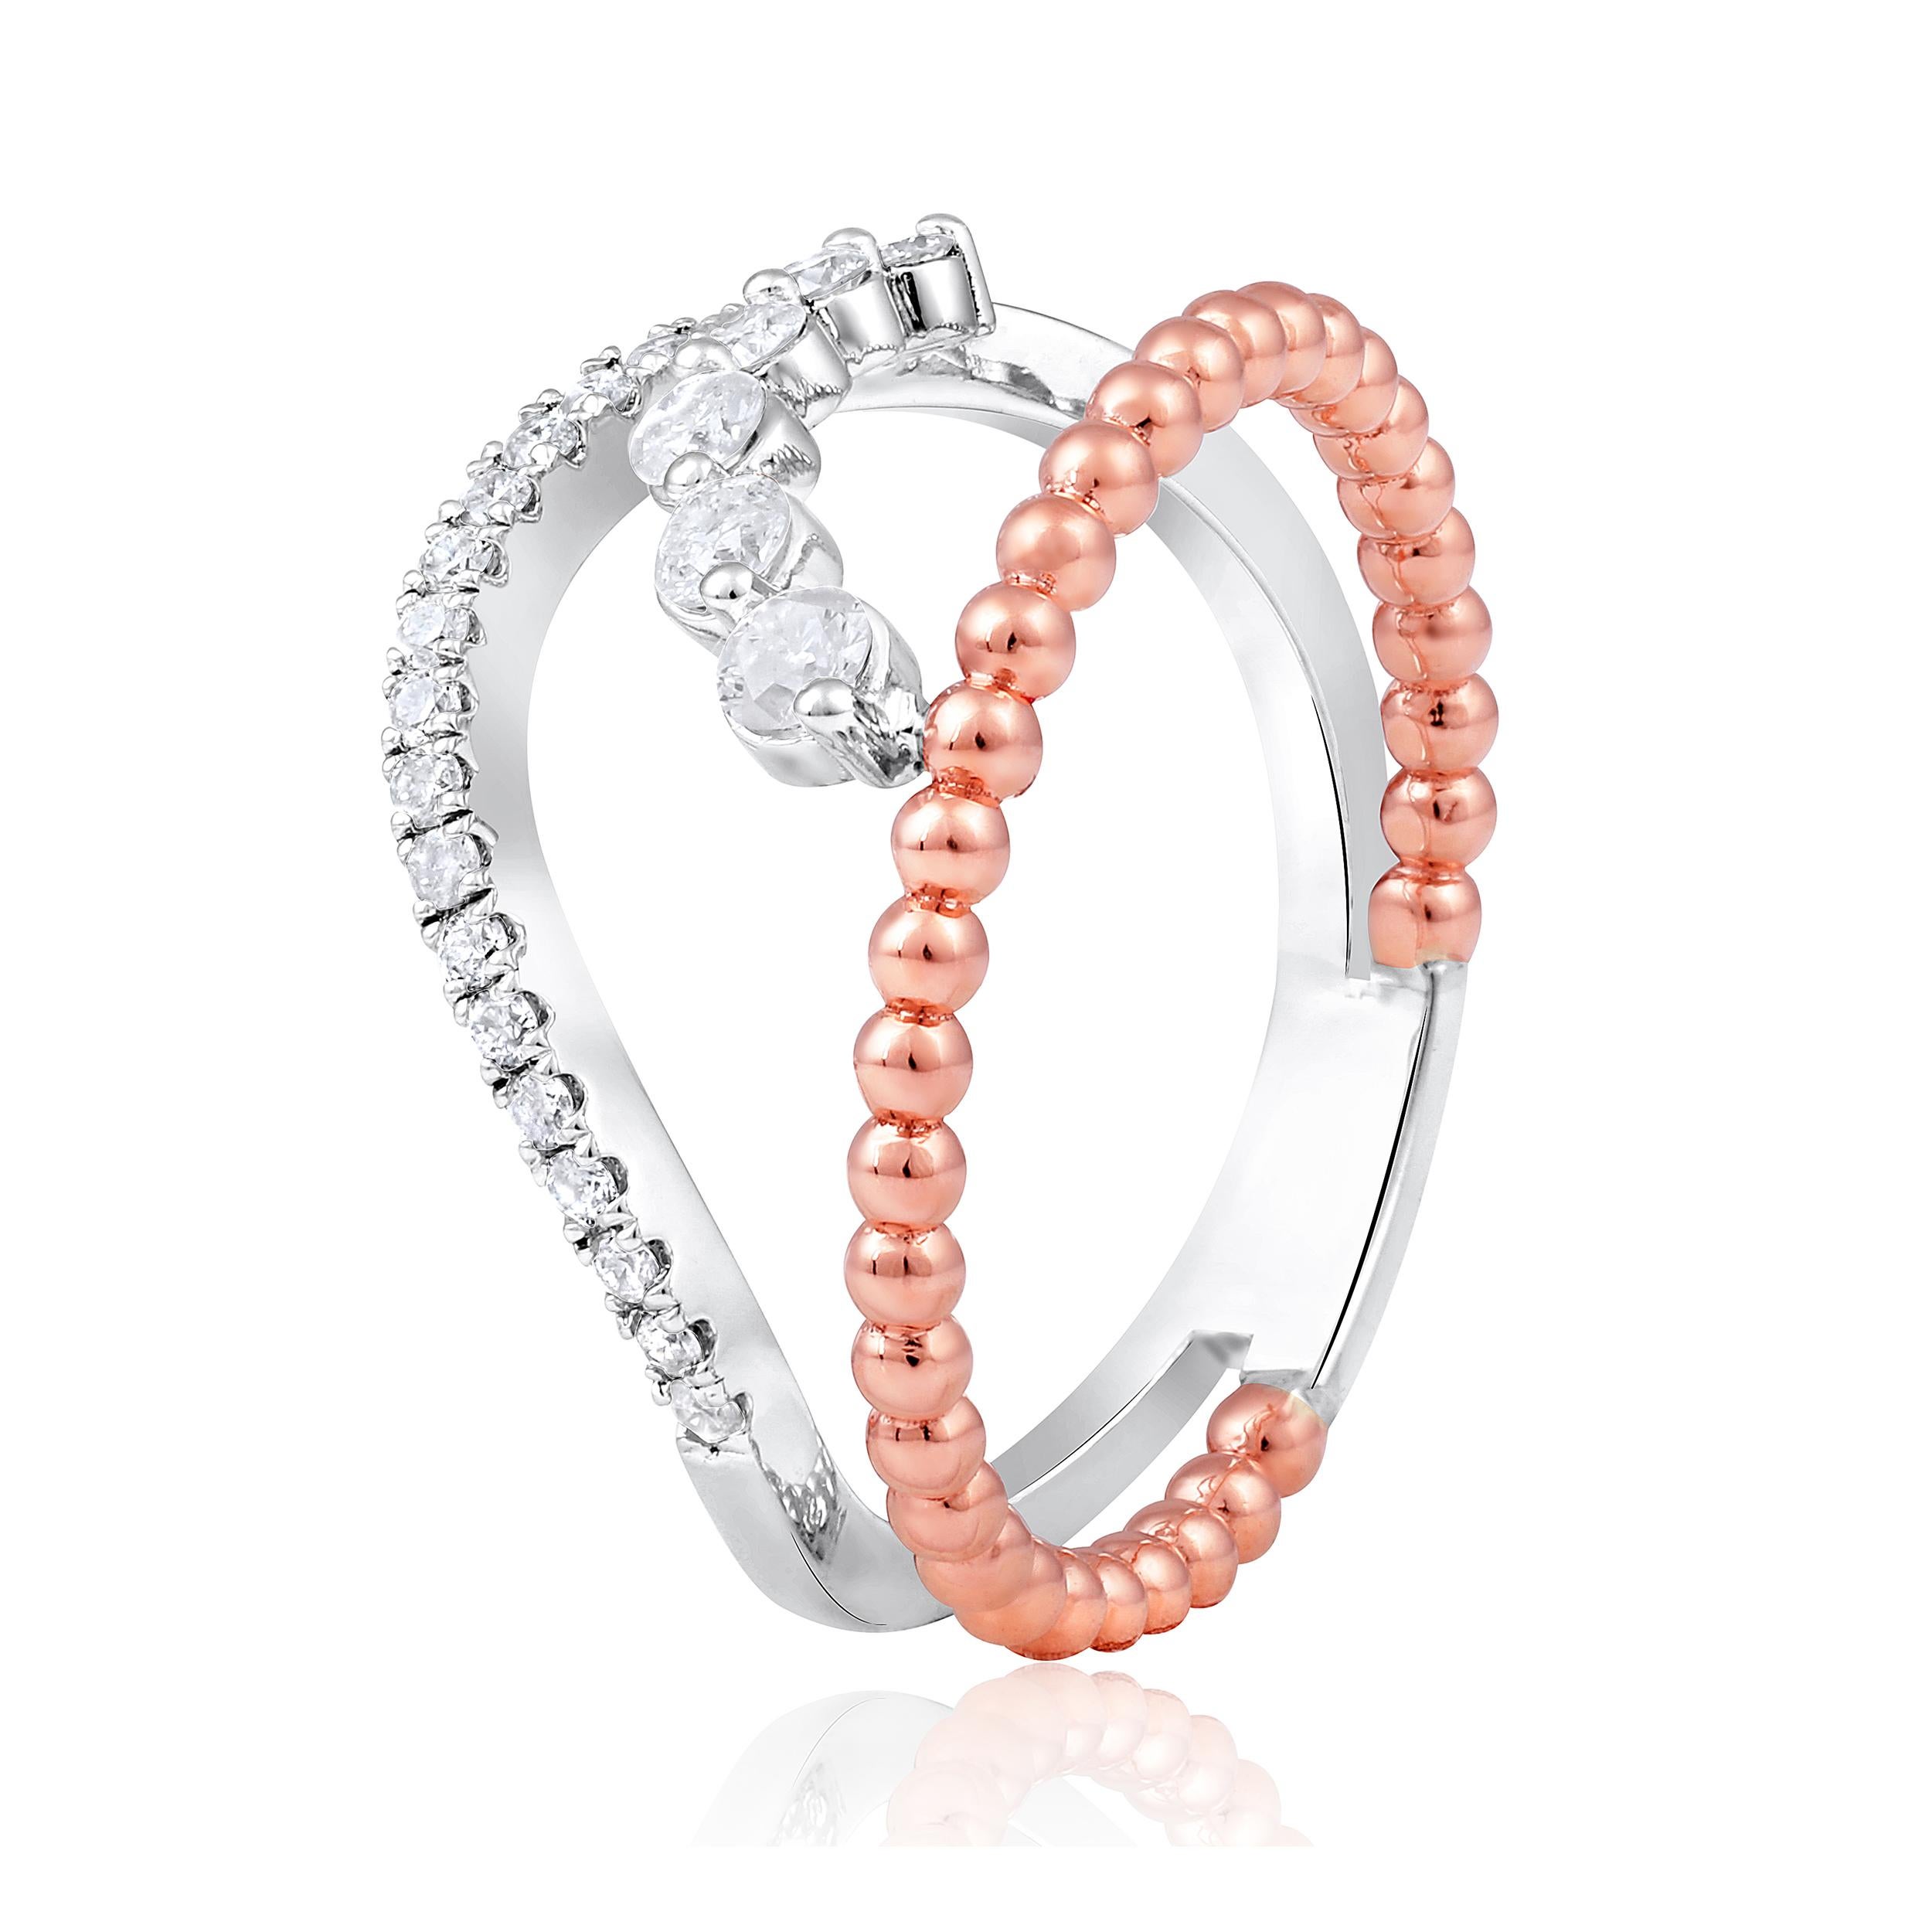 Ring Size: US 8 

Crafted in 4.5 grams of 14K White Gold and 14K Rose Gold, the ring contains 24 stones of Round Diamonds with a total of 0.39 carat in F-G color and I1-I2 clarity.

CONTEMPORARY AND TIMELESS ESSENCE: Crafted in 14-karat/18-karat